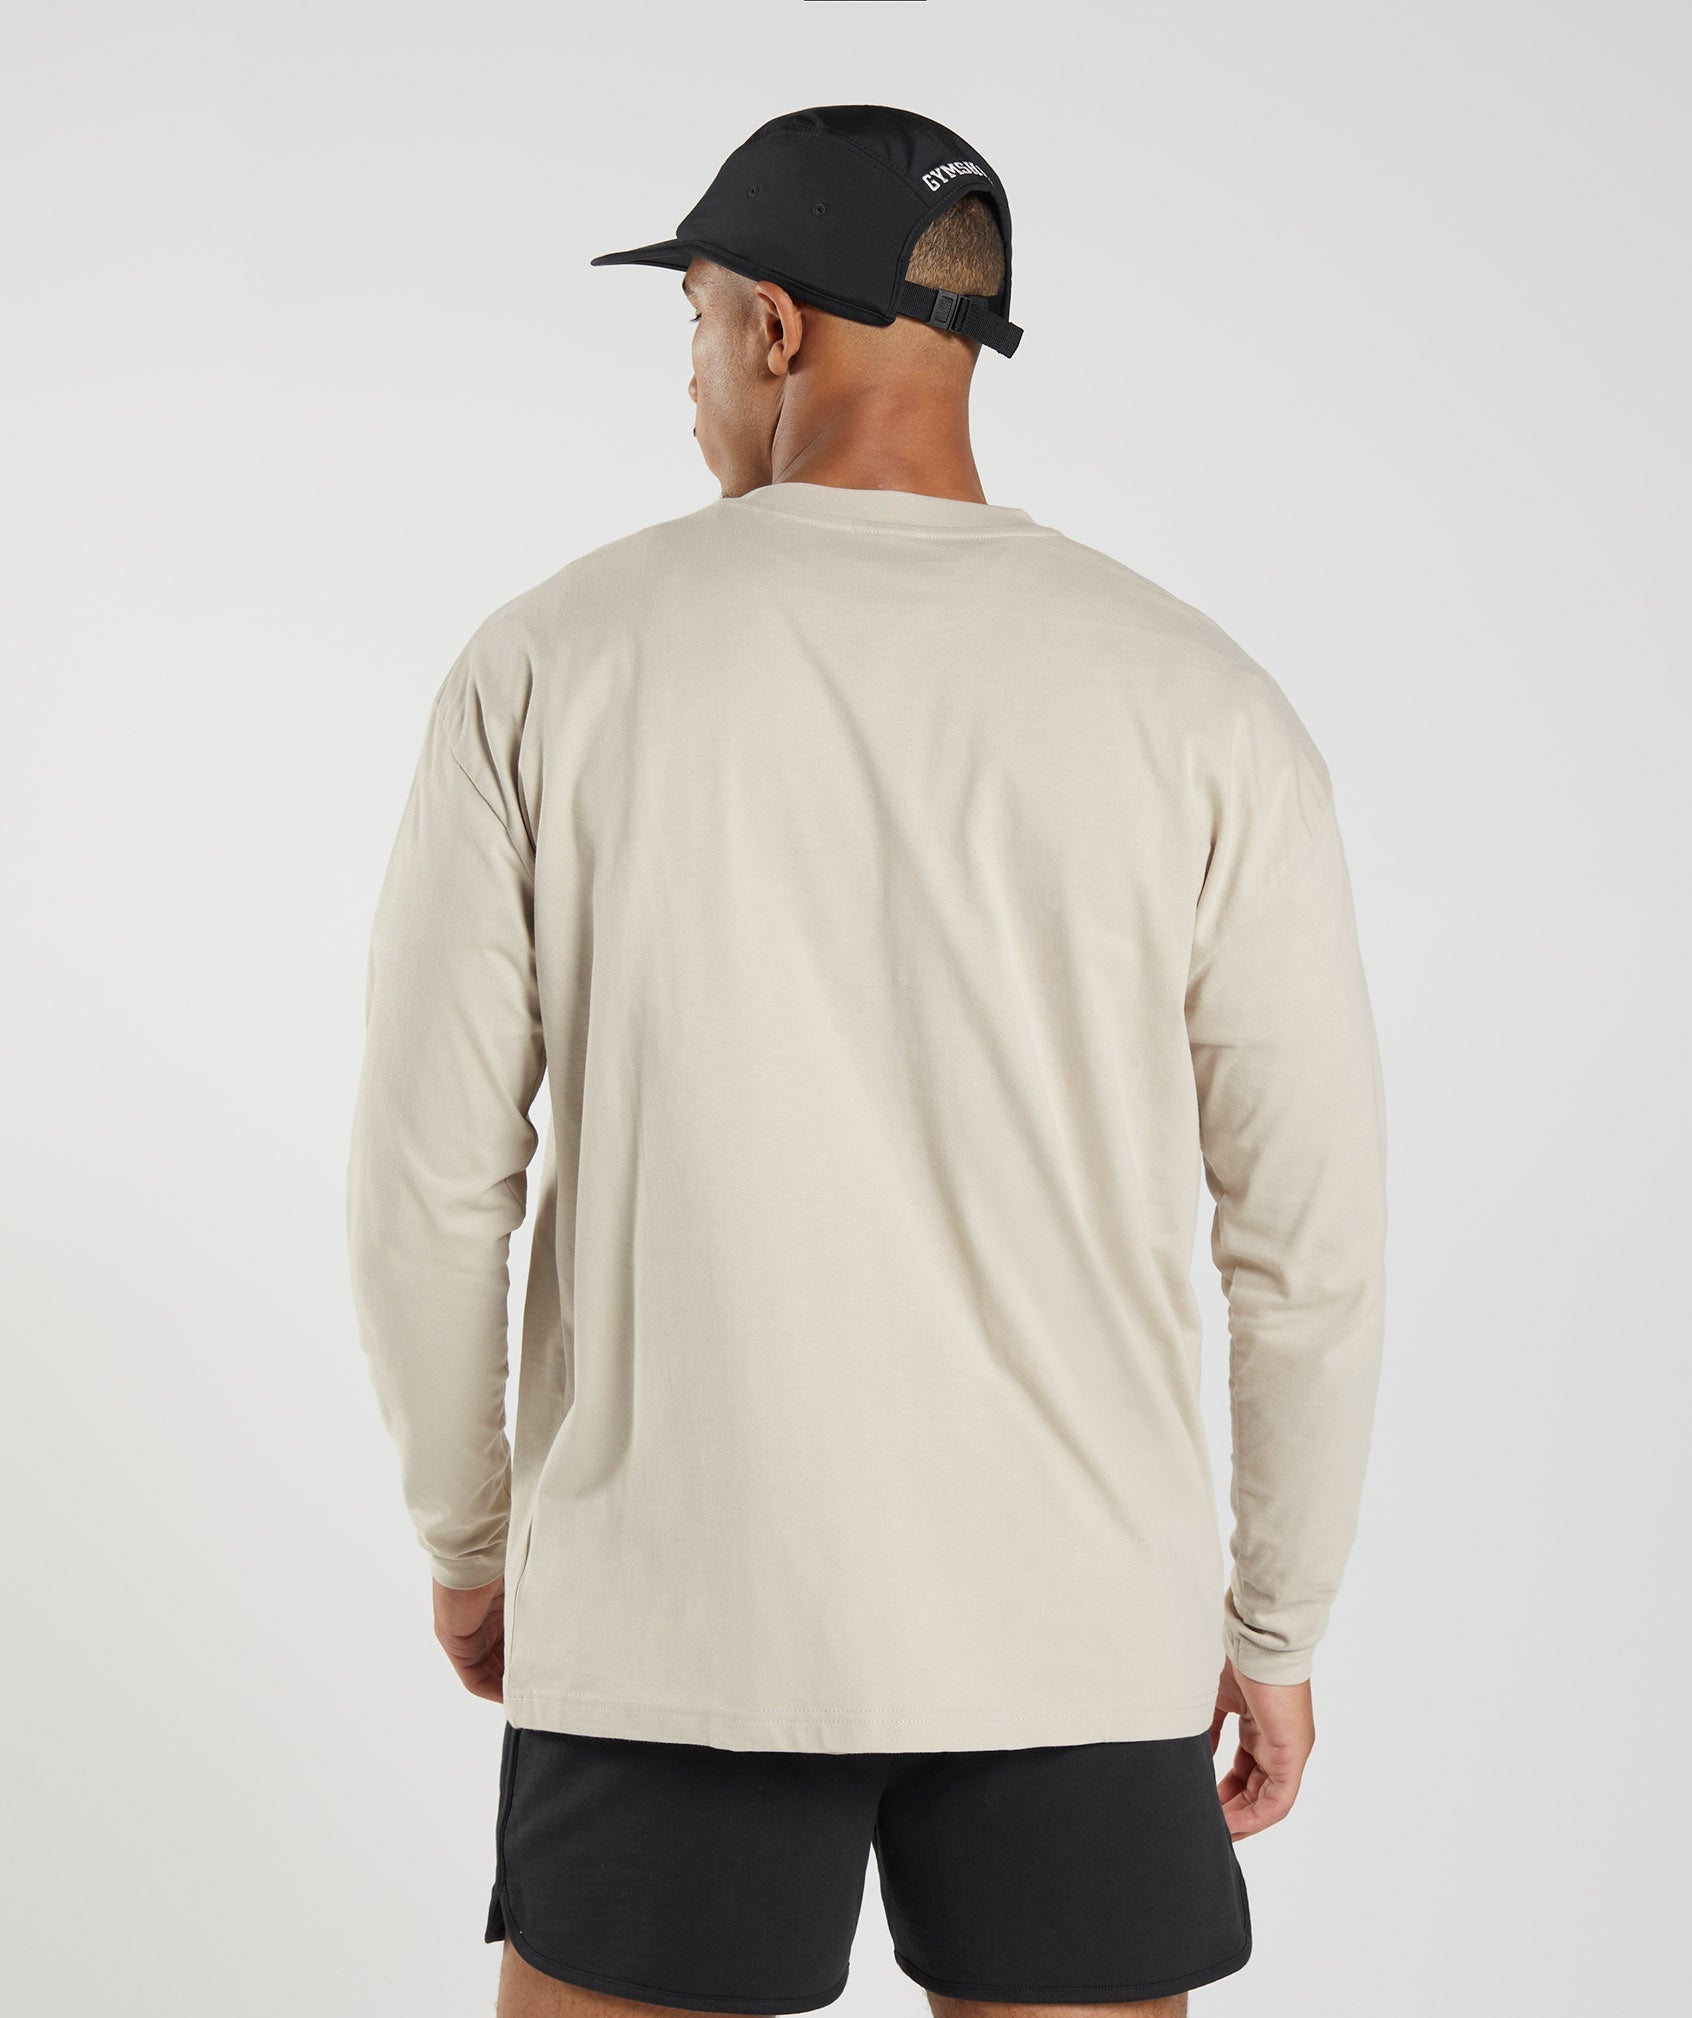 Rest Day Sweats Long Sleeve T-Shirt in Pebble Grey - view 3